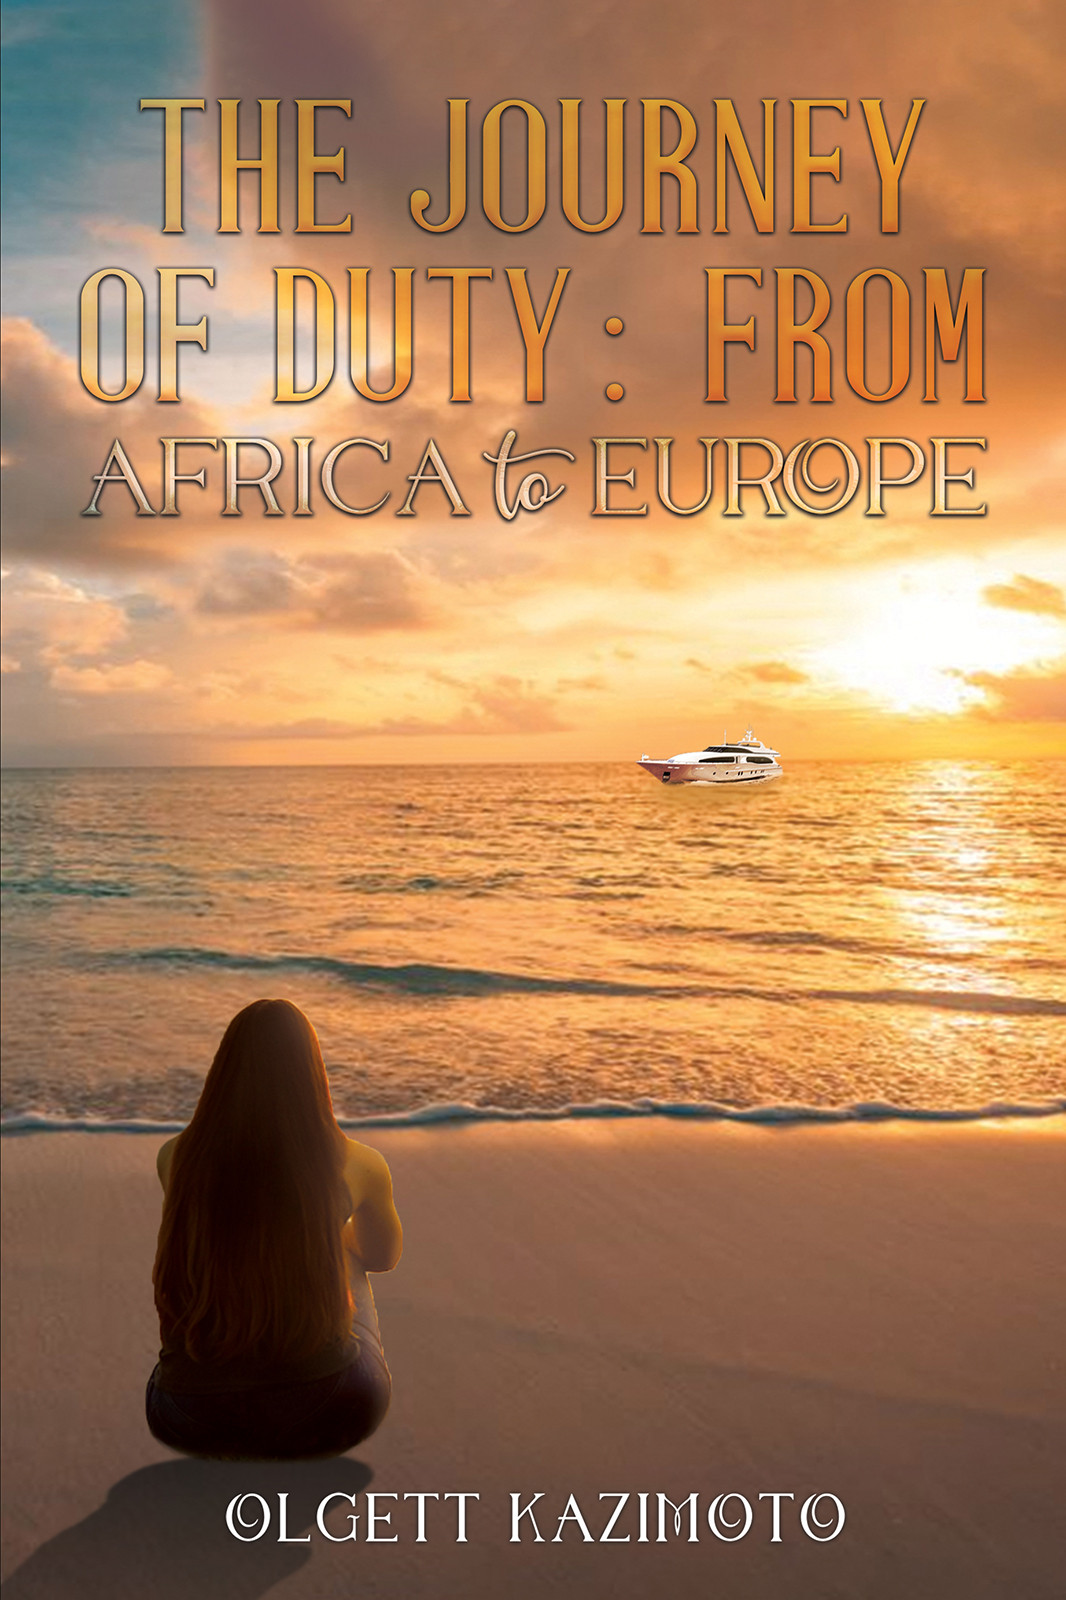 The Journey of Duty: From Africa to Europe-bookcover